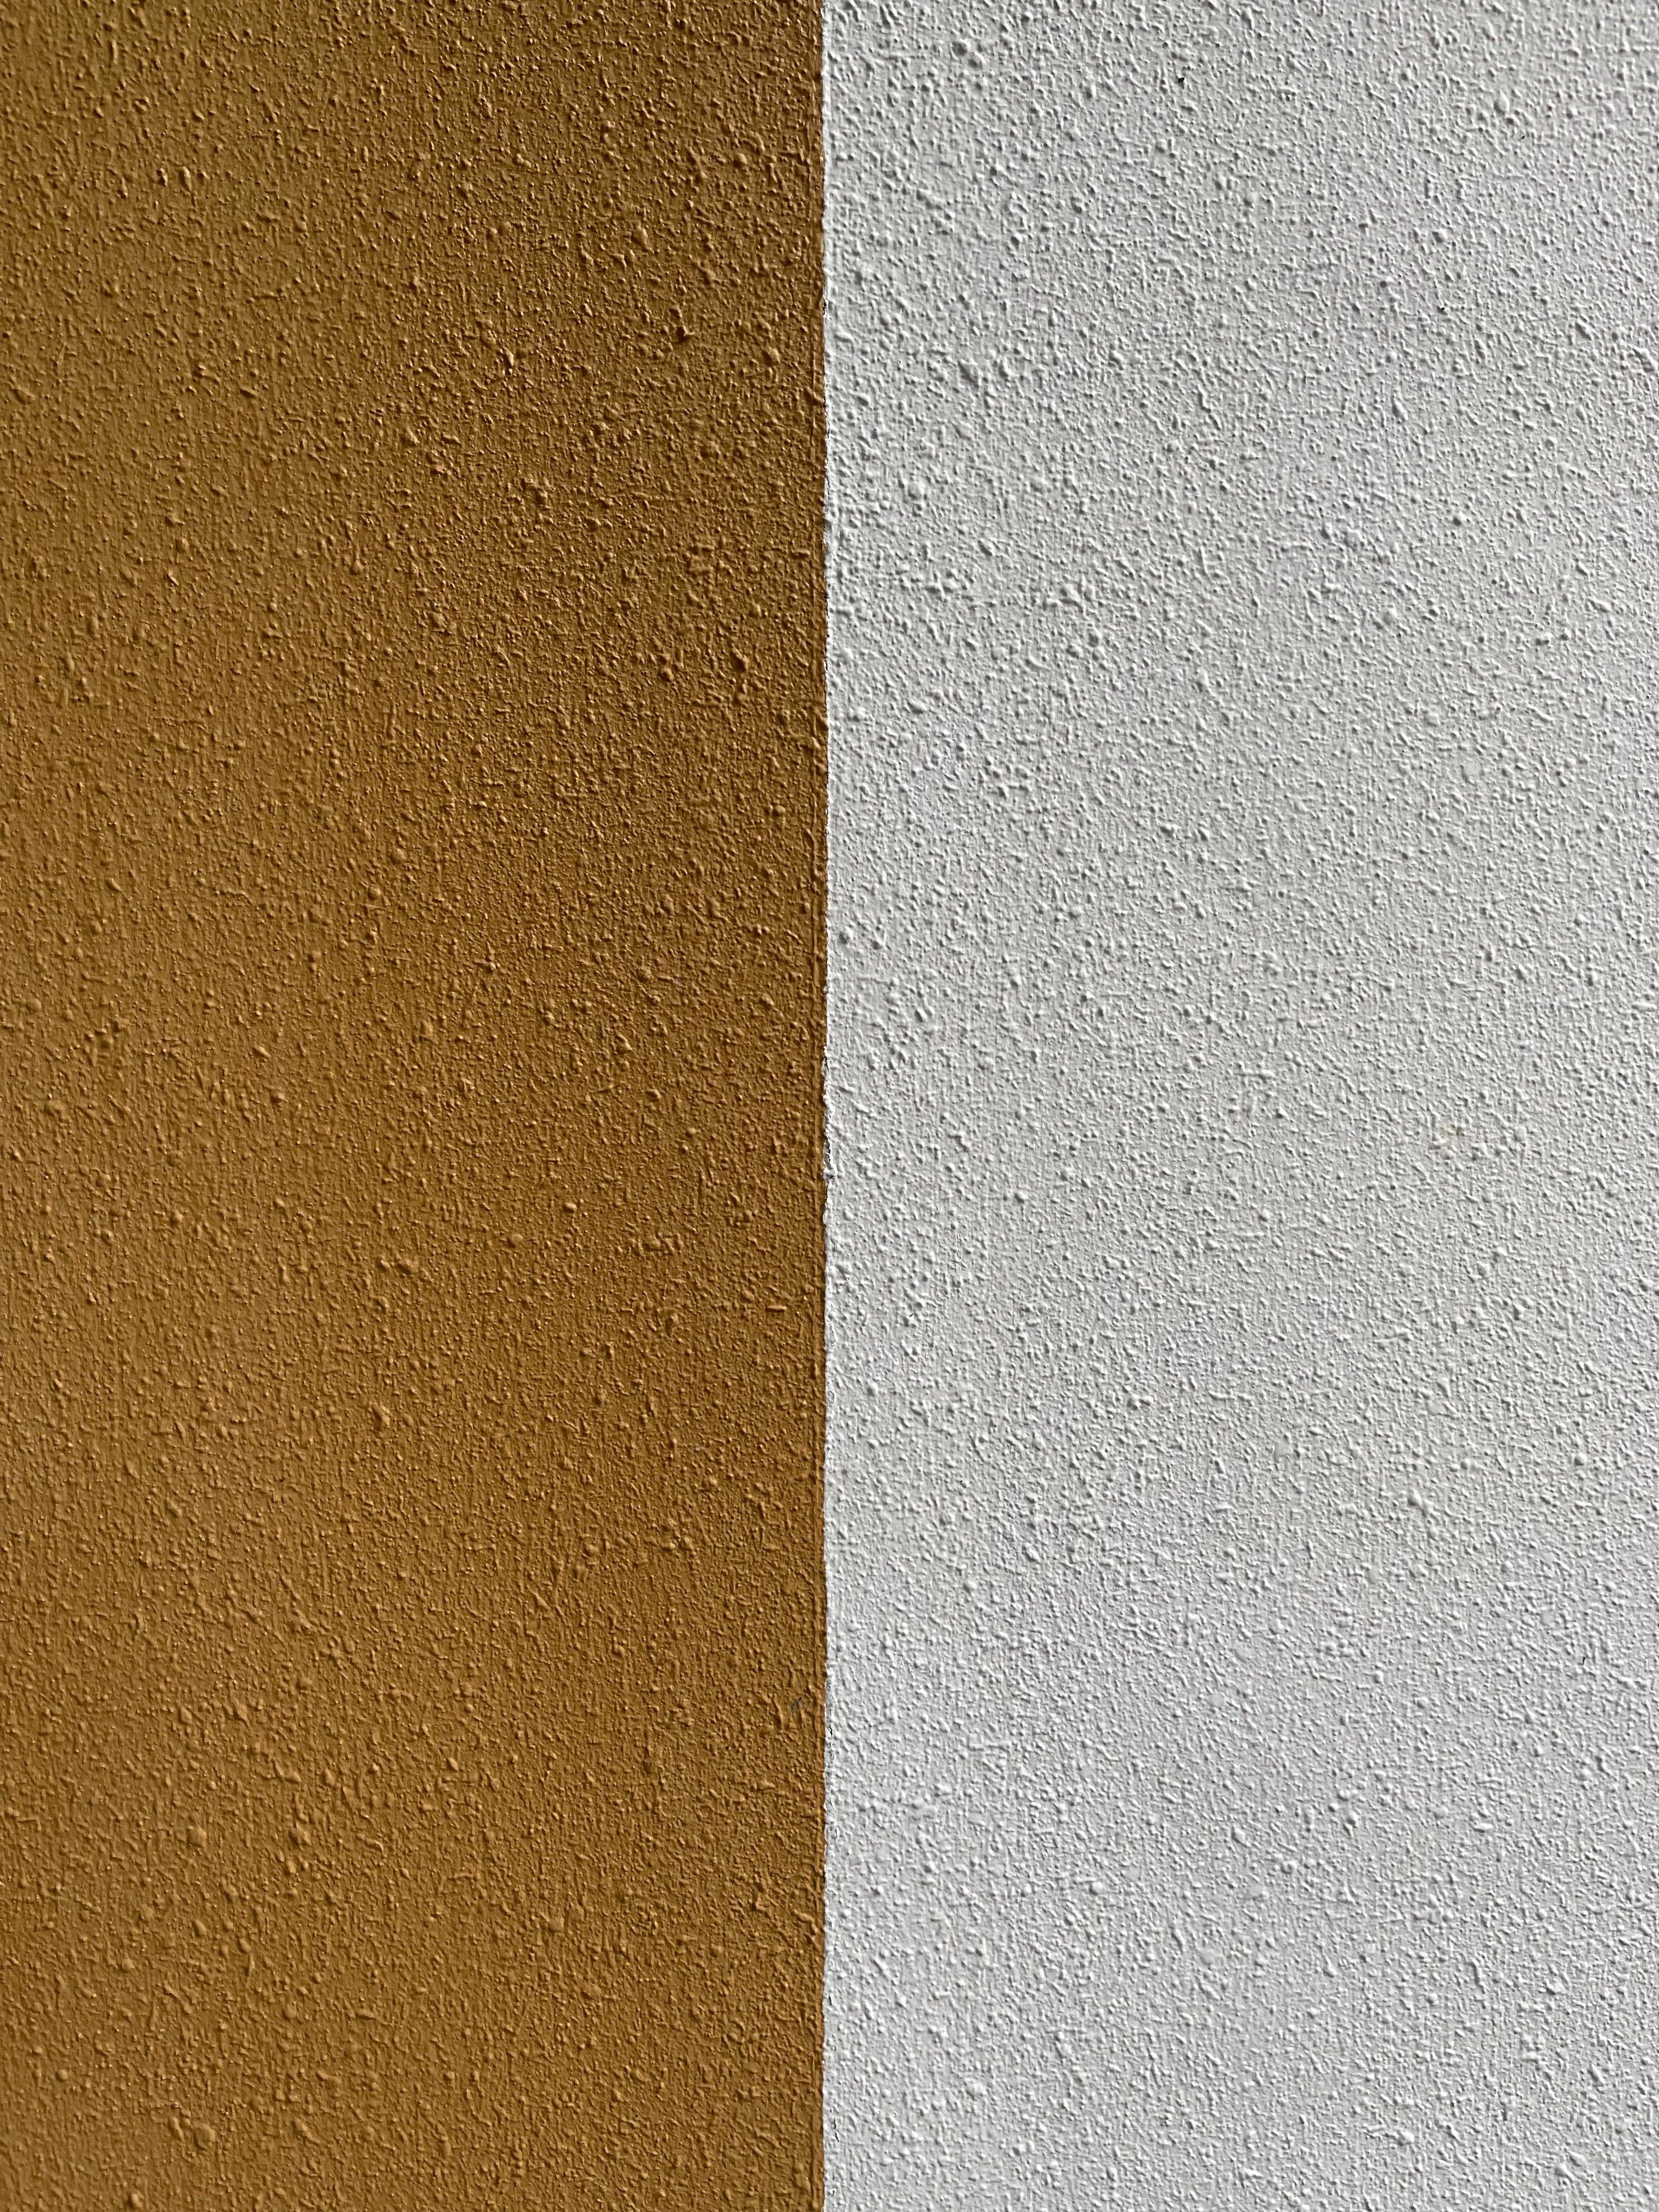 Wall Surface Rough Stripes Texture Brown